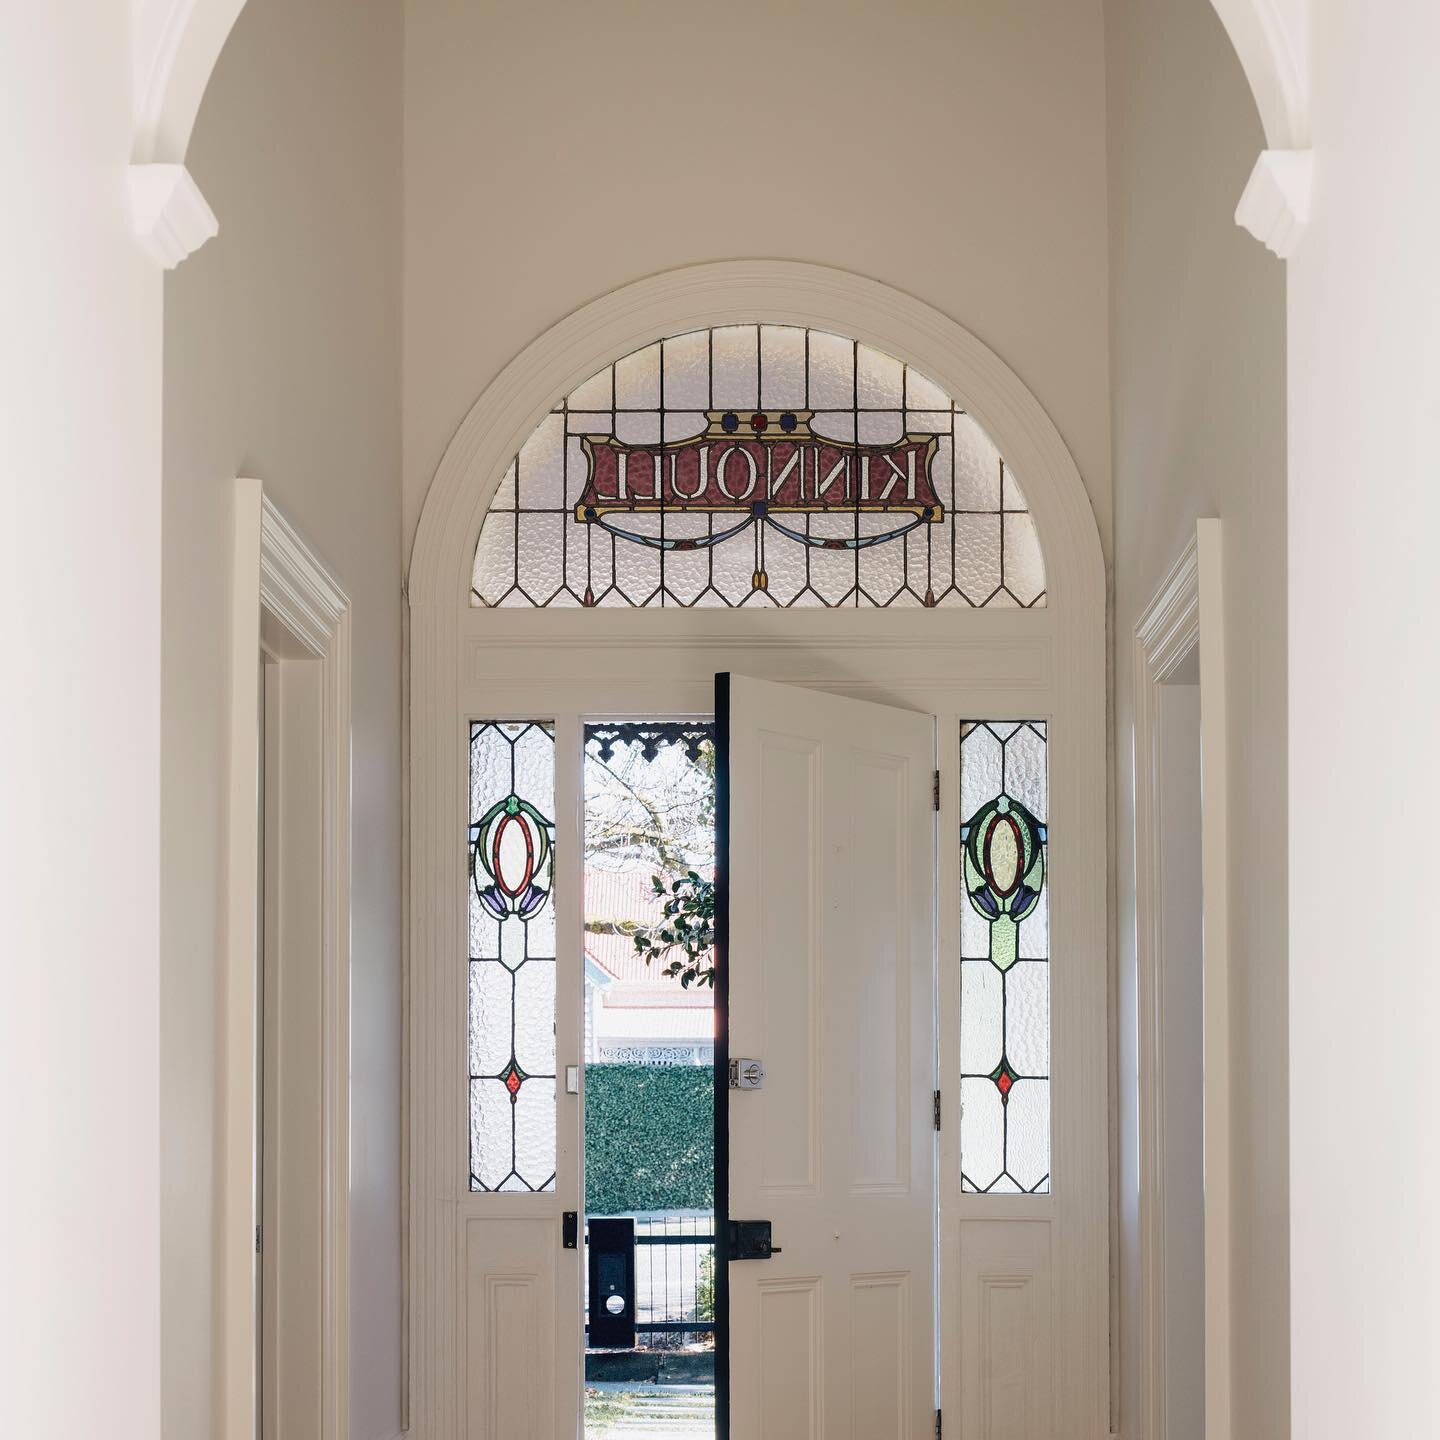 #wsdrummond front entry original lead light installed during Ballarat&rsquo;s gold rush era, lovingly restored by @whisperingsmitharchitecture @mbjbuildinglandscapes image by @benhoskingphotographer